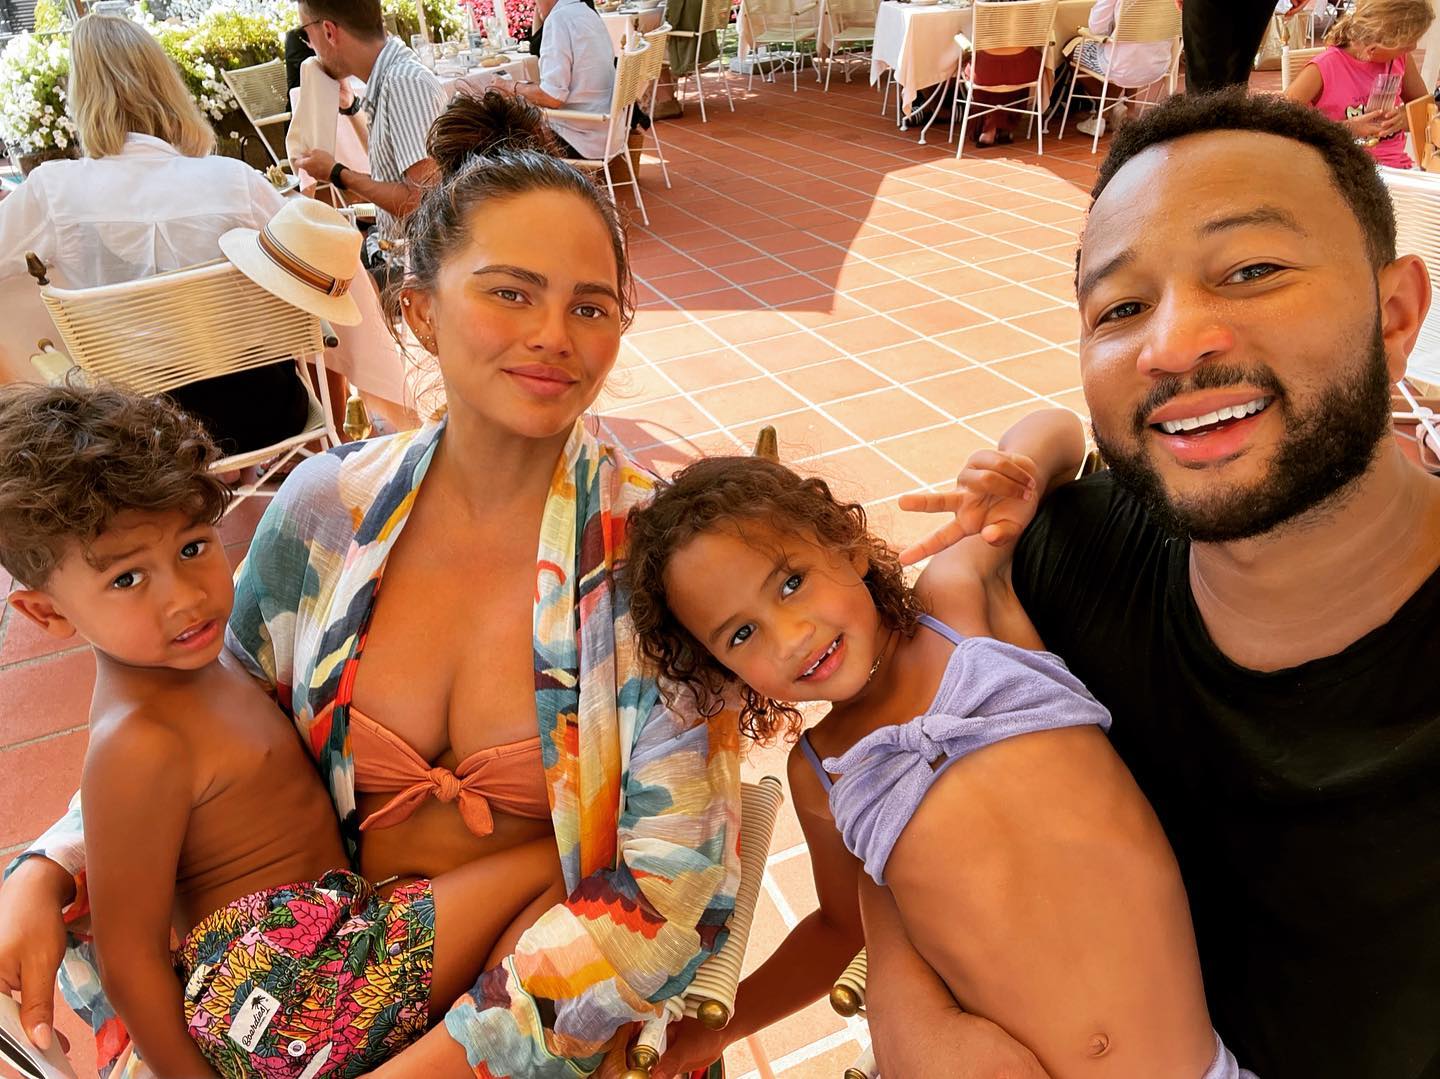 John Legend And Chrissy Teigen Welcome A New Baby, Growing Their Family